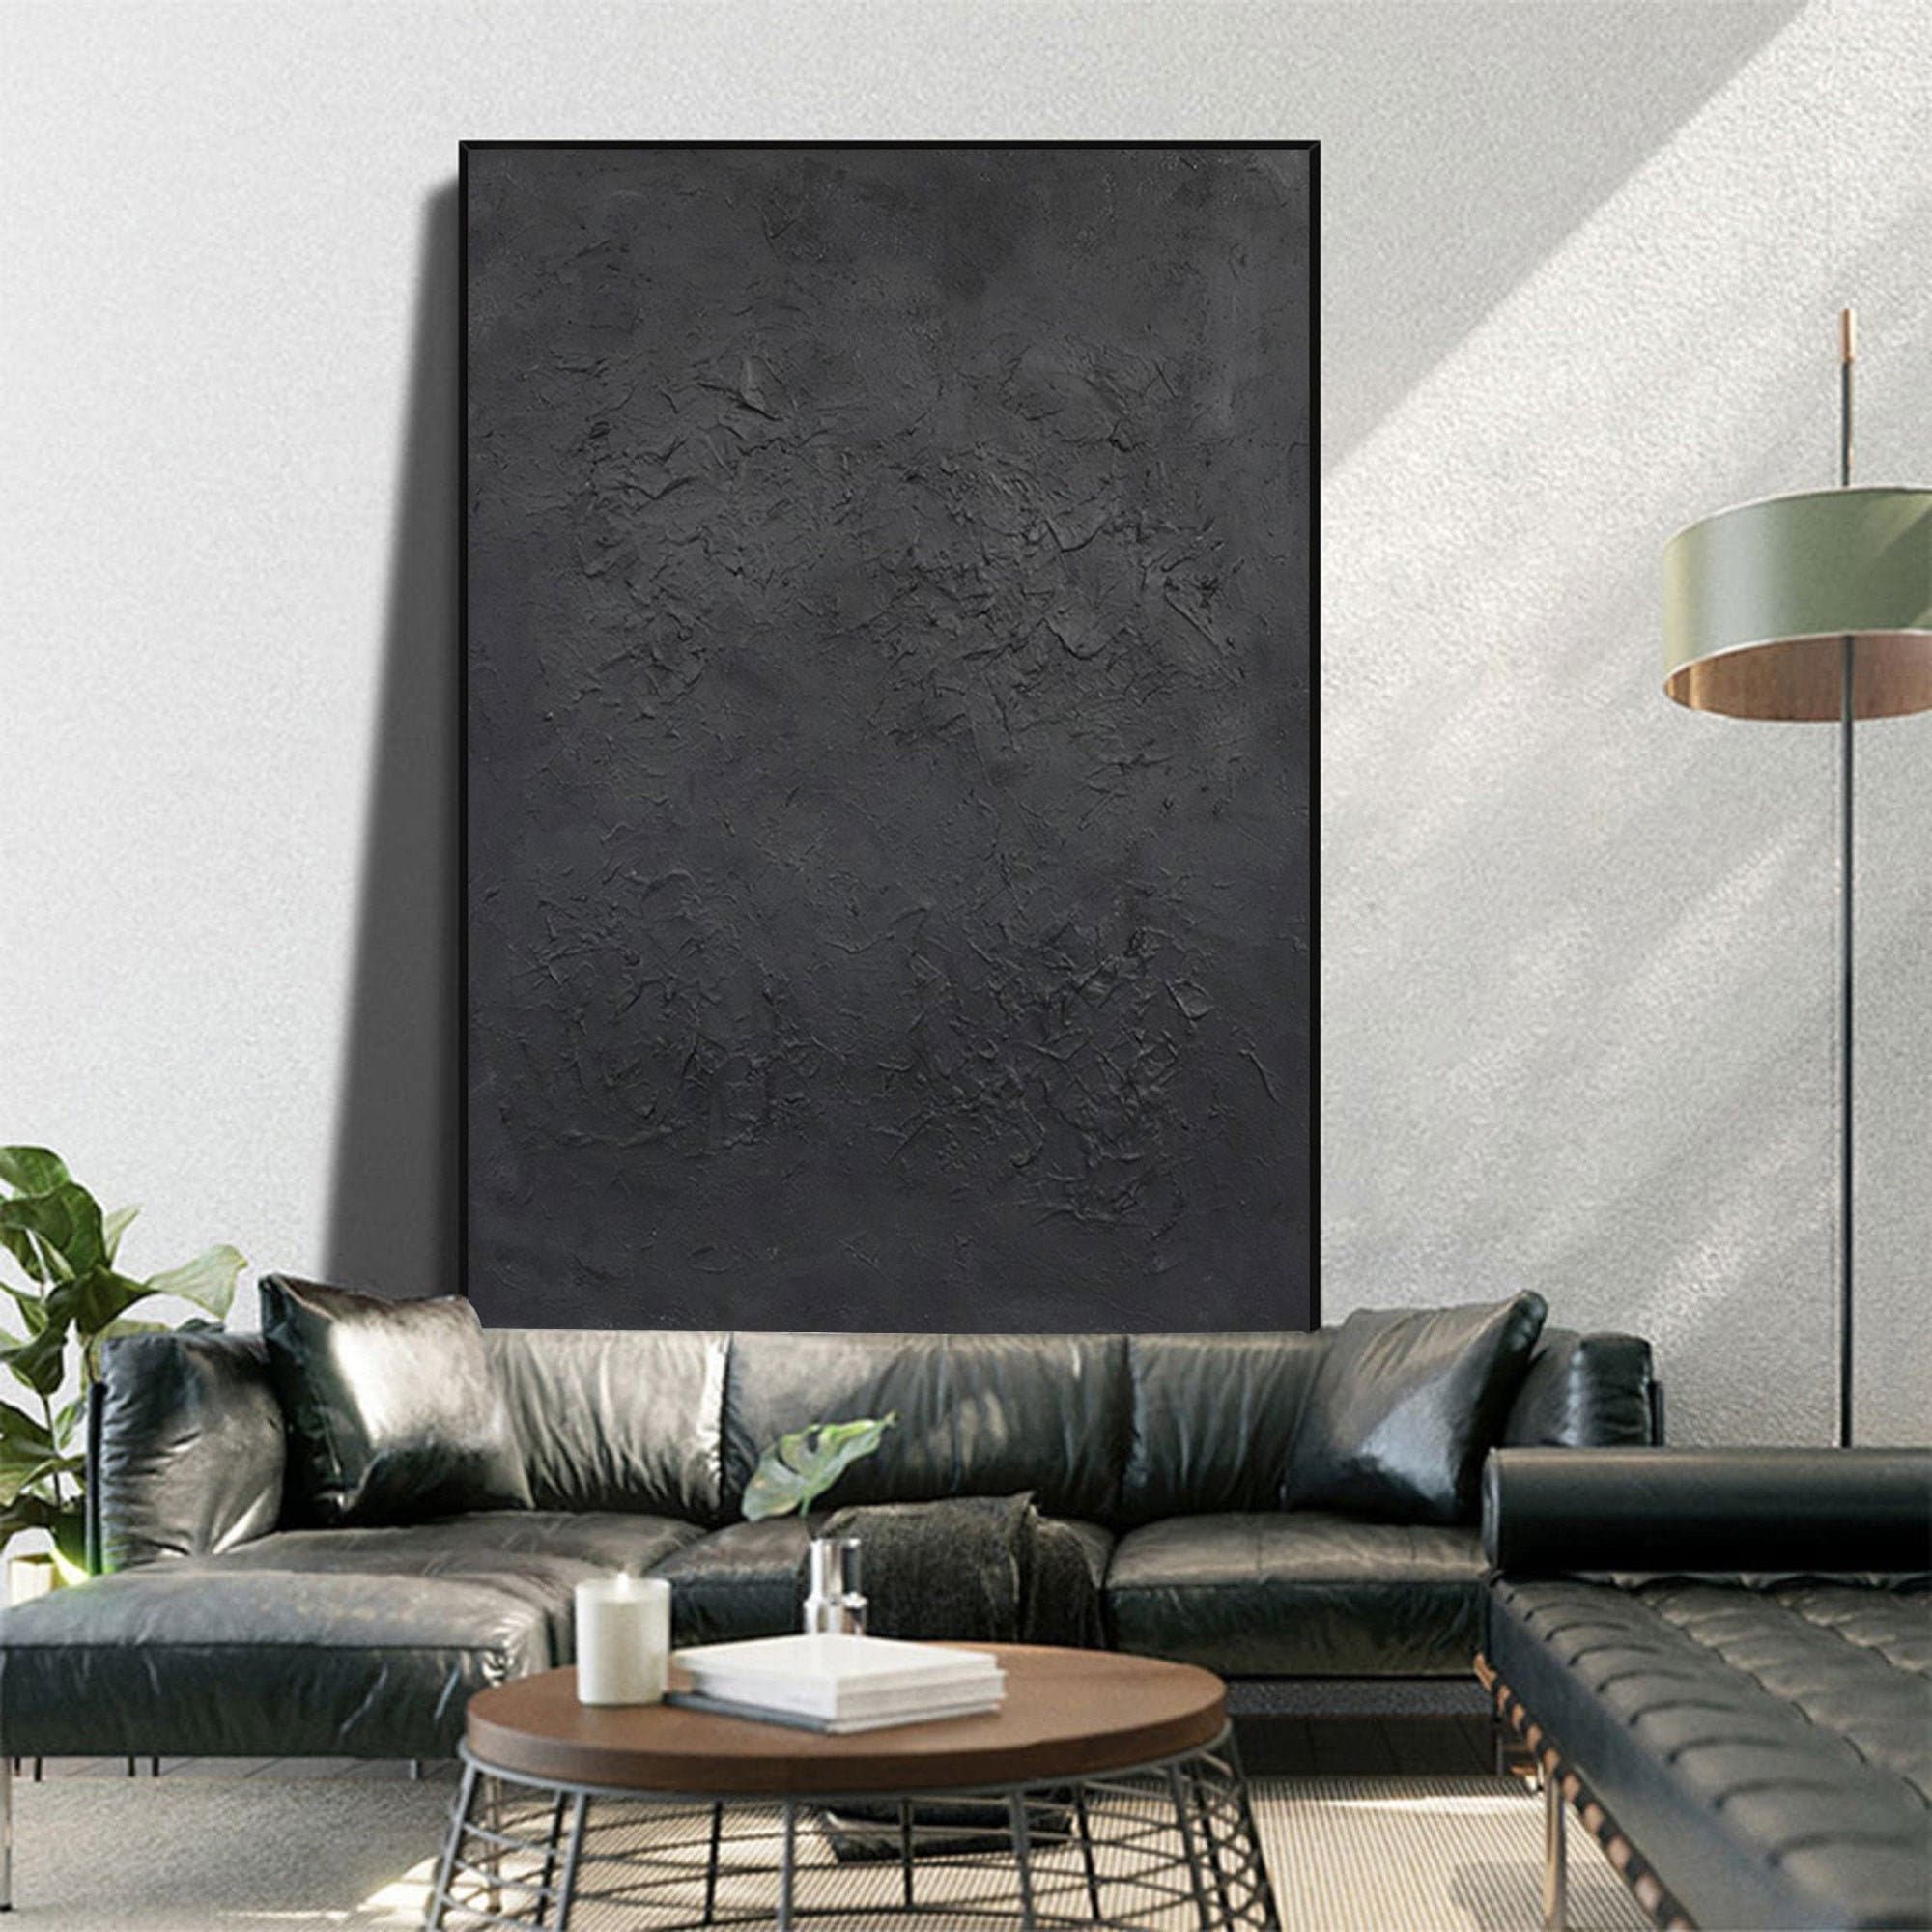 Black Minimalist Wall Art Pertaining To Most Recent Black Textured Wall Art Black Wall Art Black Abstract Painting – Etsy (View 7 of 15)